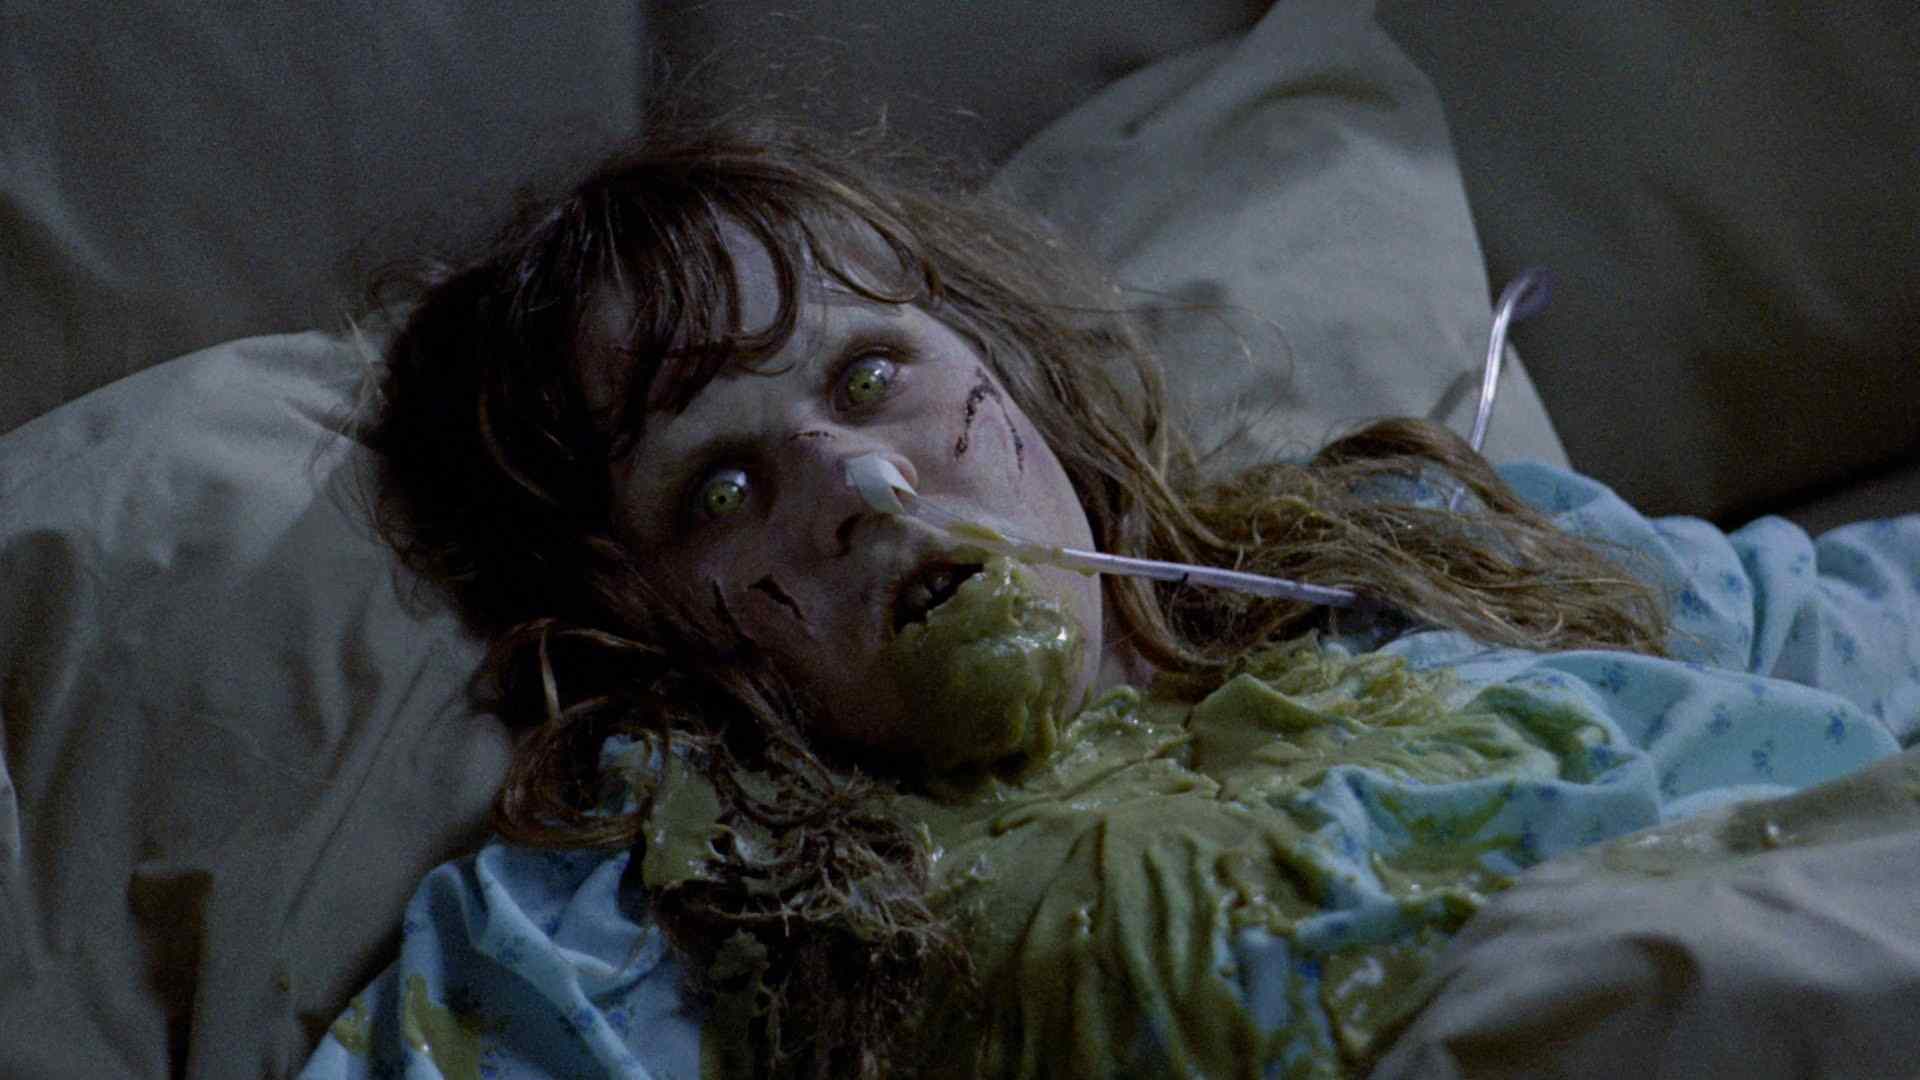 Linda Blair who played Regan in the successful and widely known exorcist film.